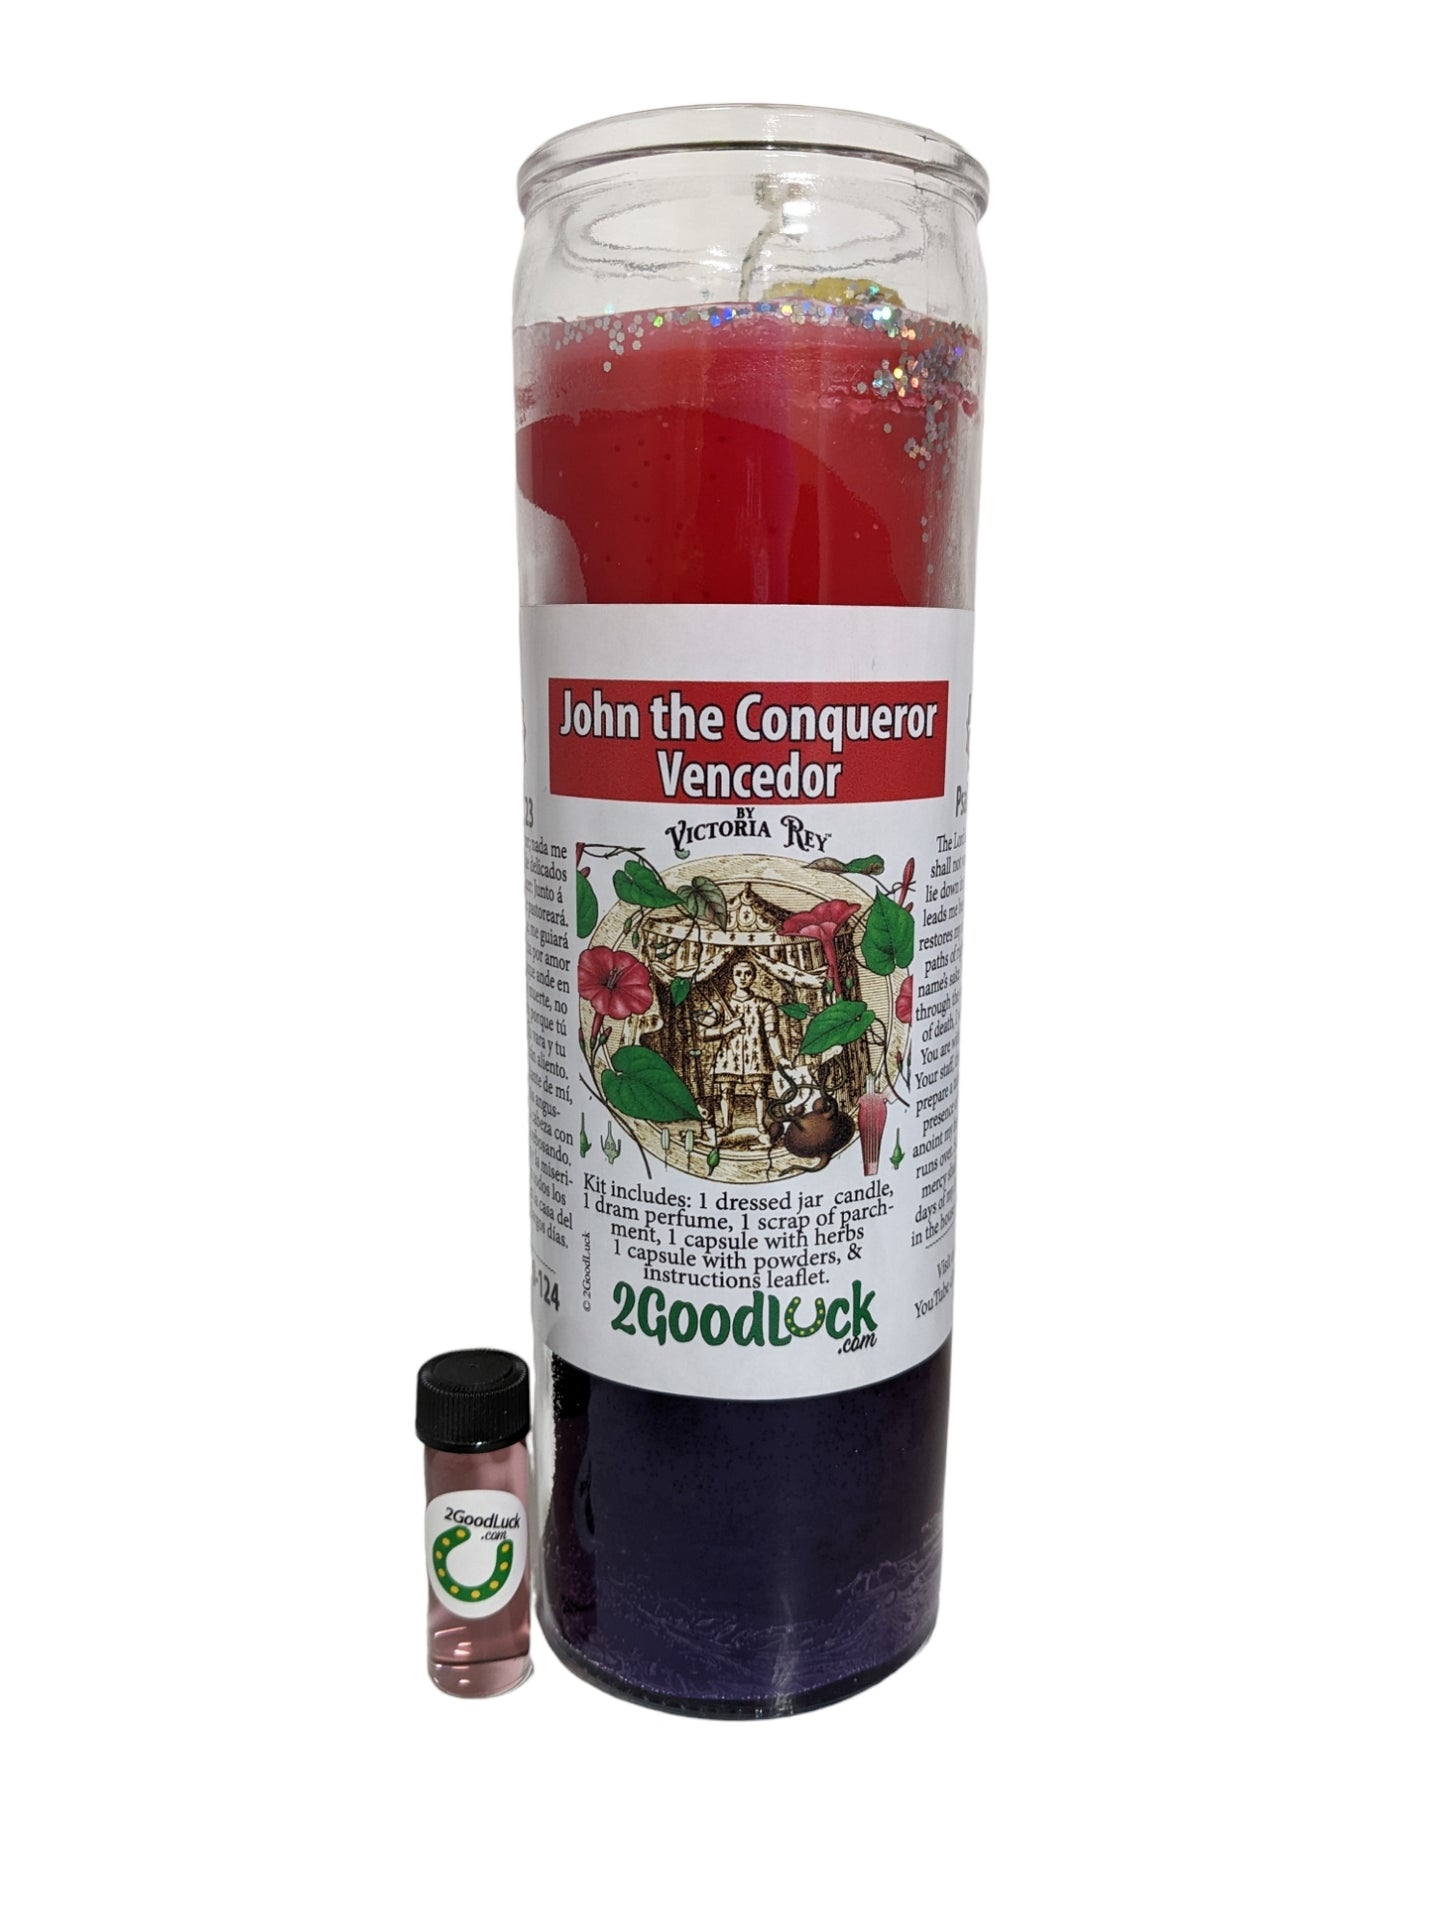 Conqueror Dressed Candle Kit - Vencedor